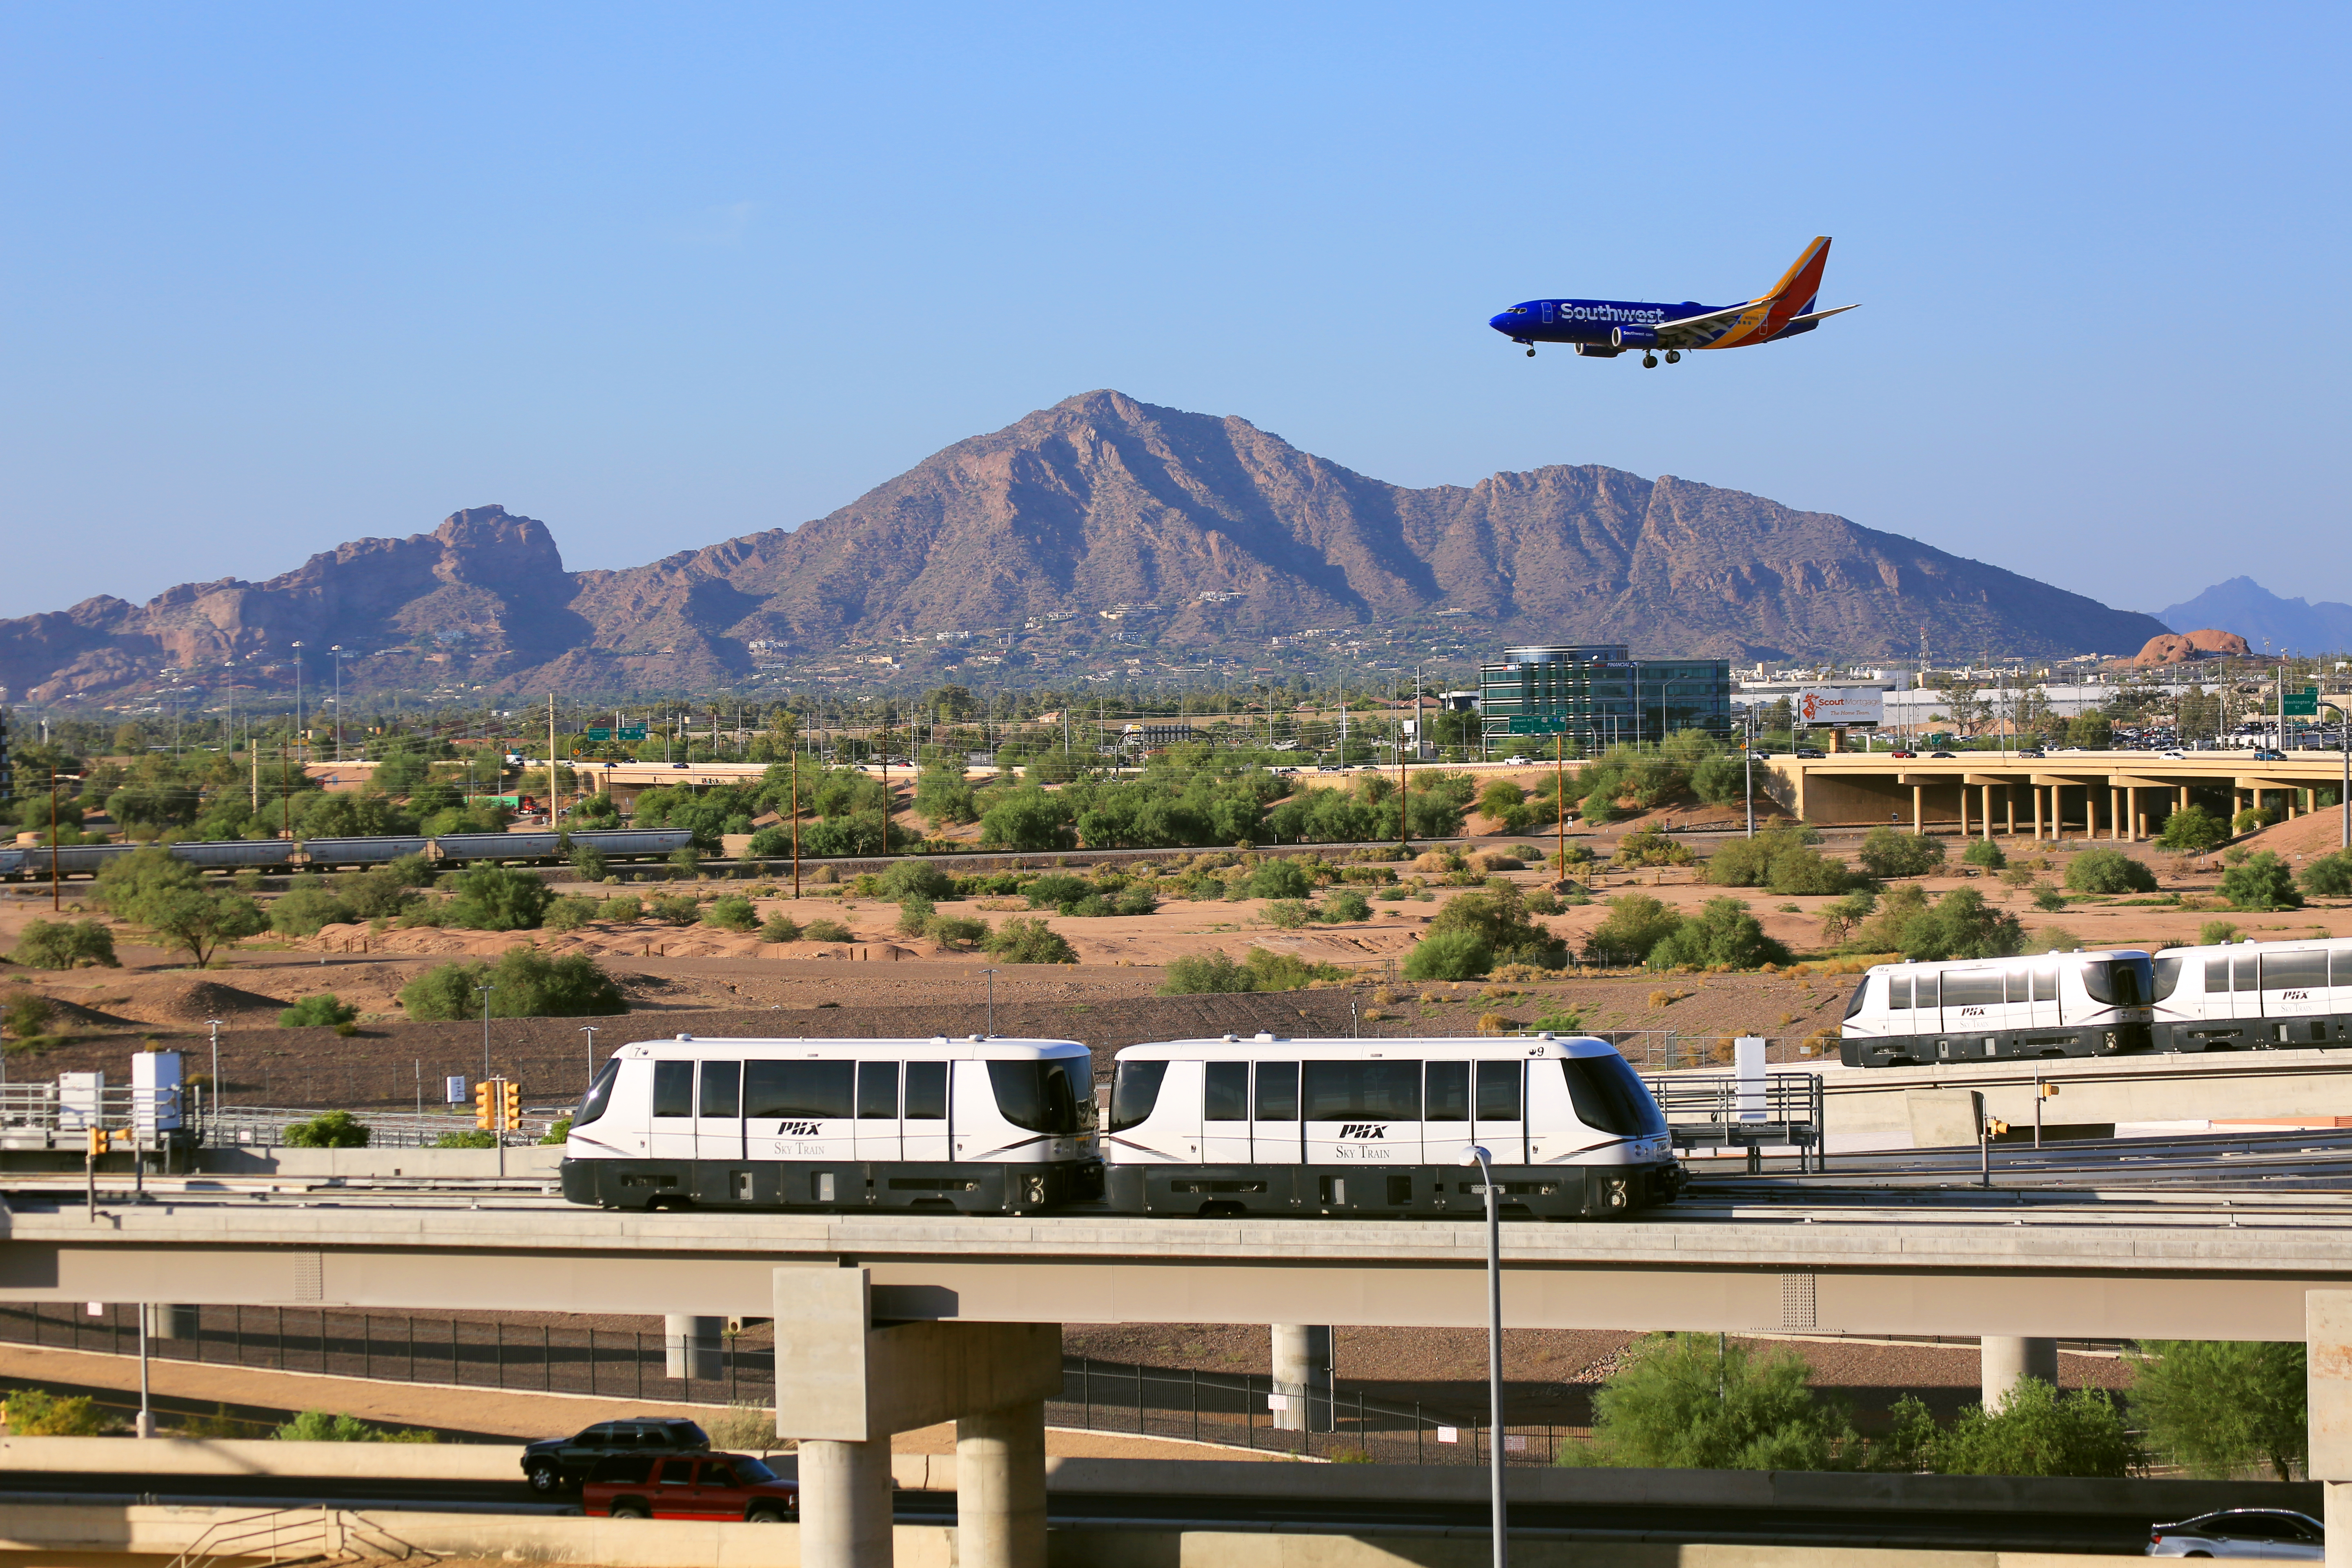 PHX Sky Train on Camelback with View of Southwest Plane